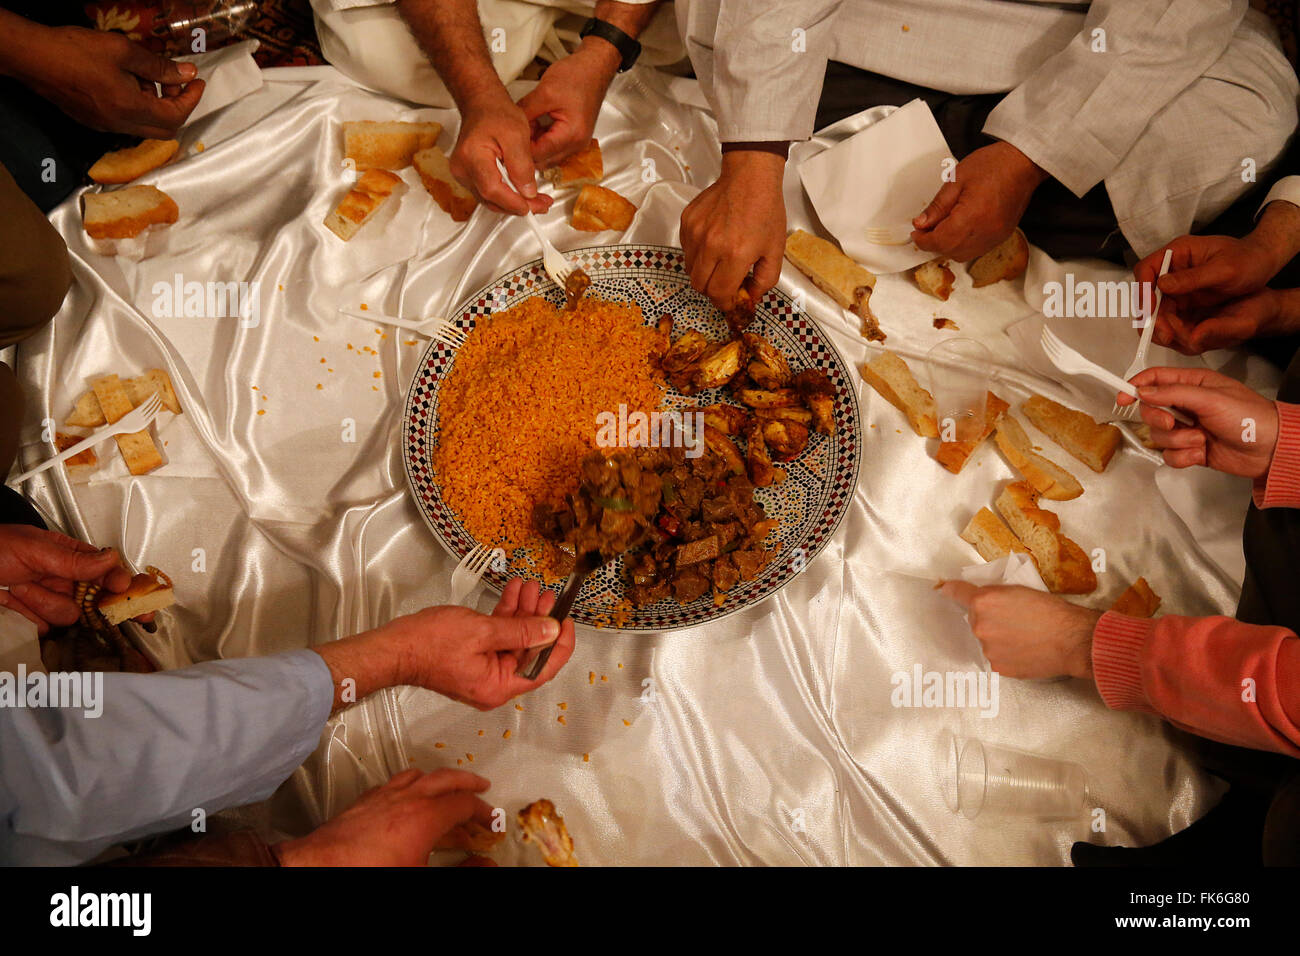 Muslims sharing a meal, Nandy, Seine-et-Marne, France, Europe Stock Photo